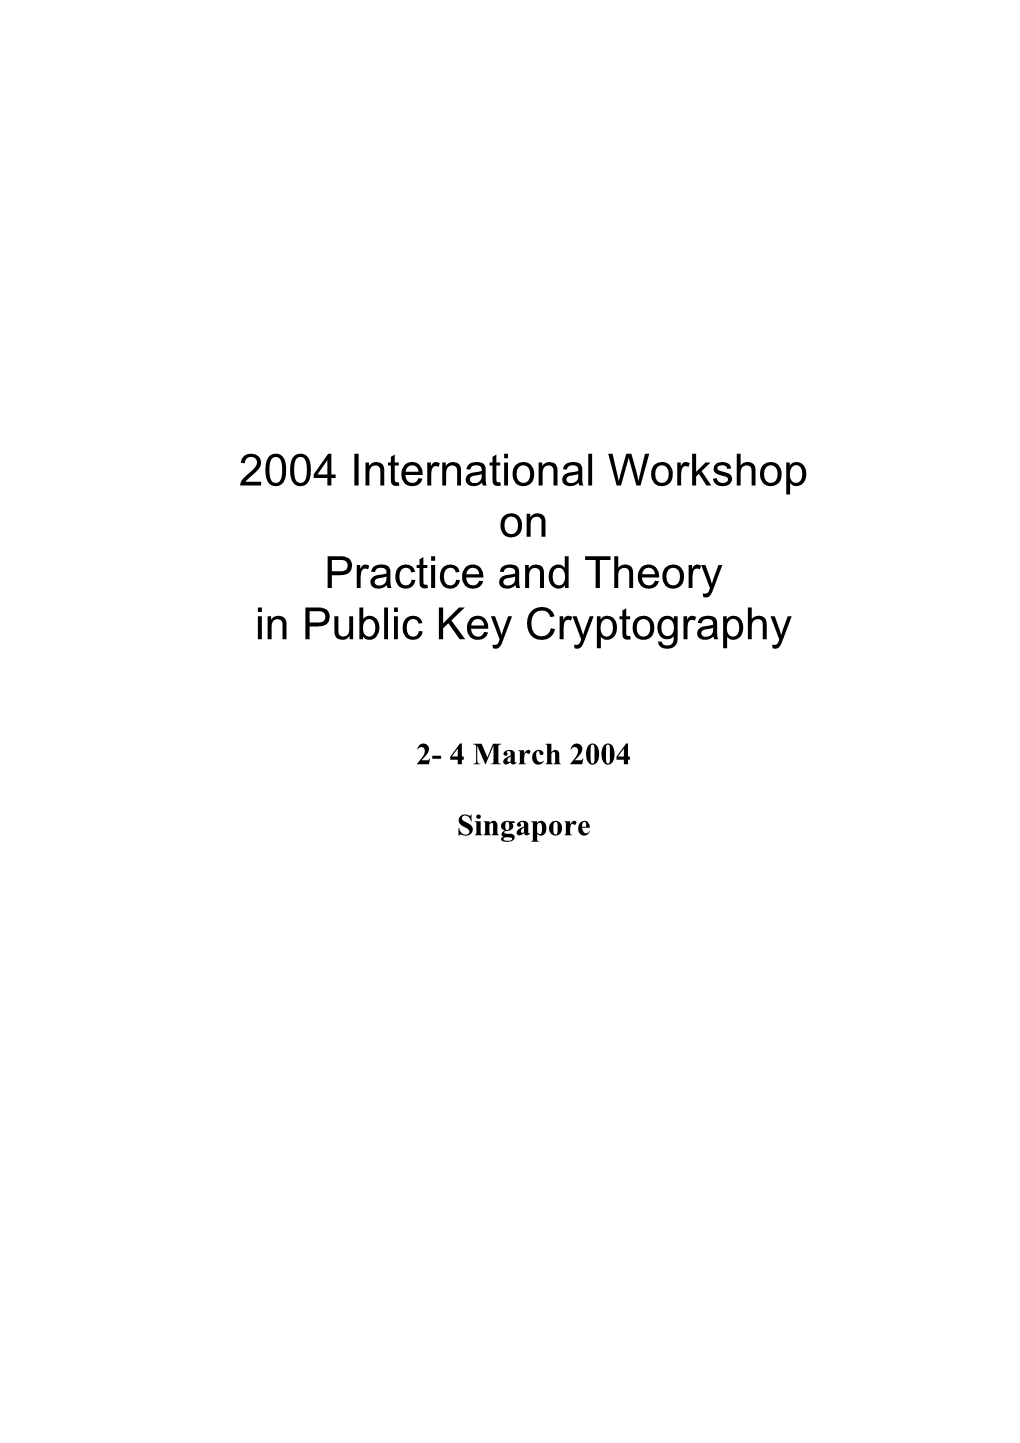 2004 International Workshop on Practice and Theory in Public Key Cryptography